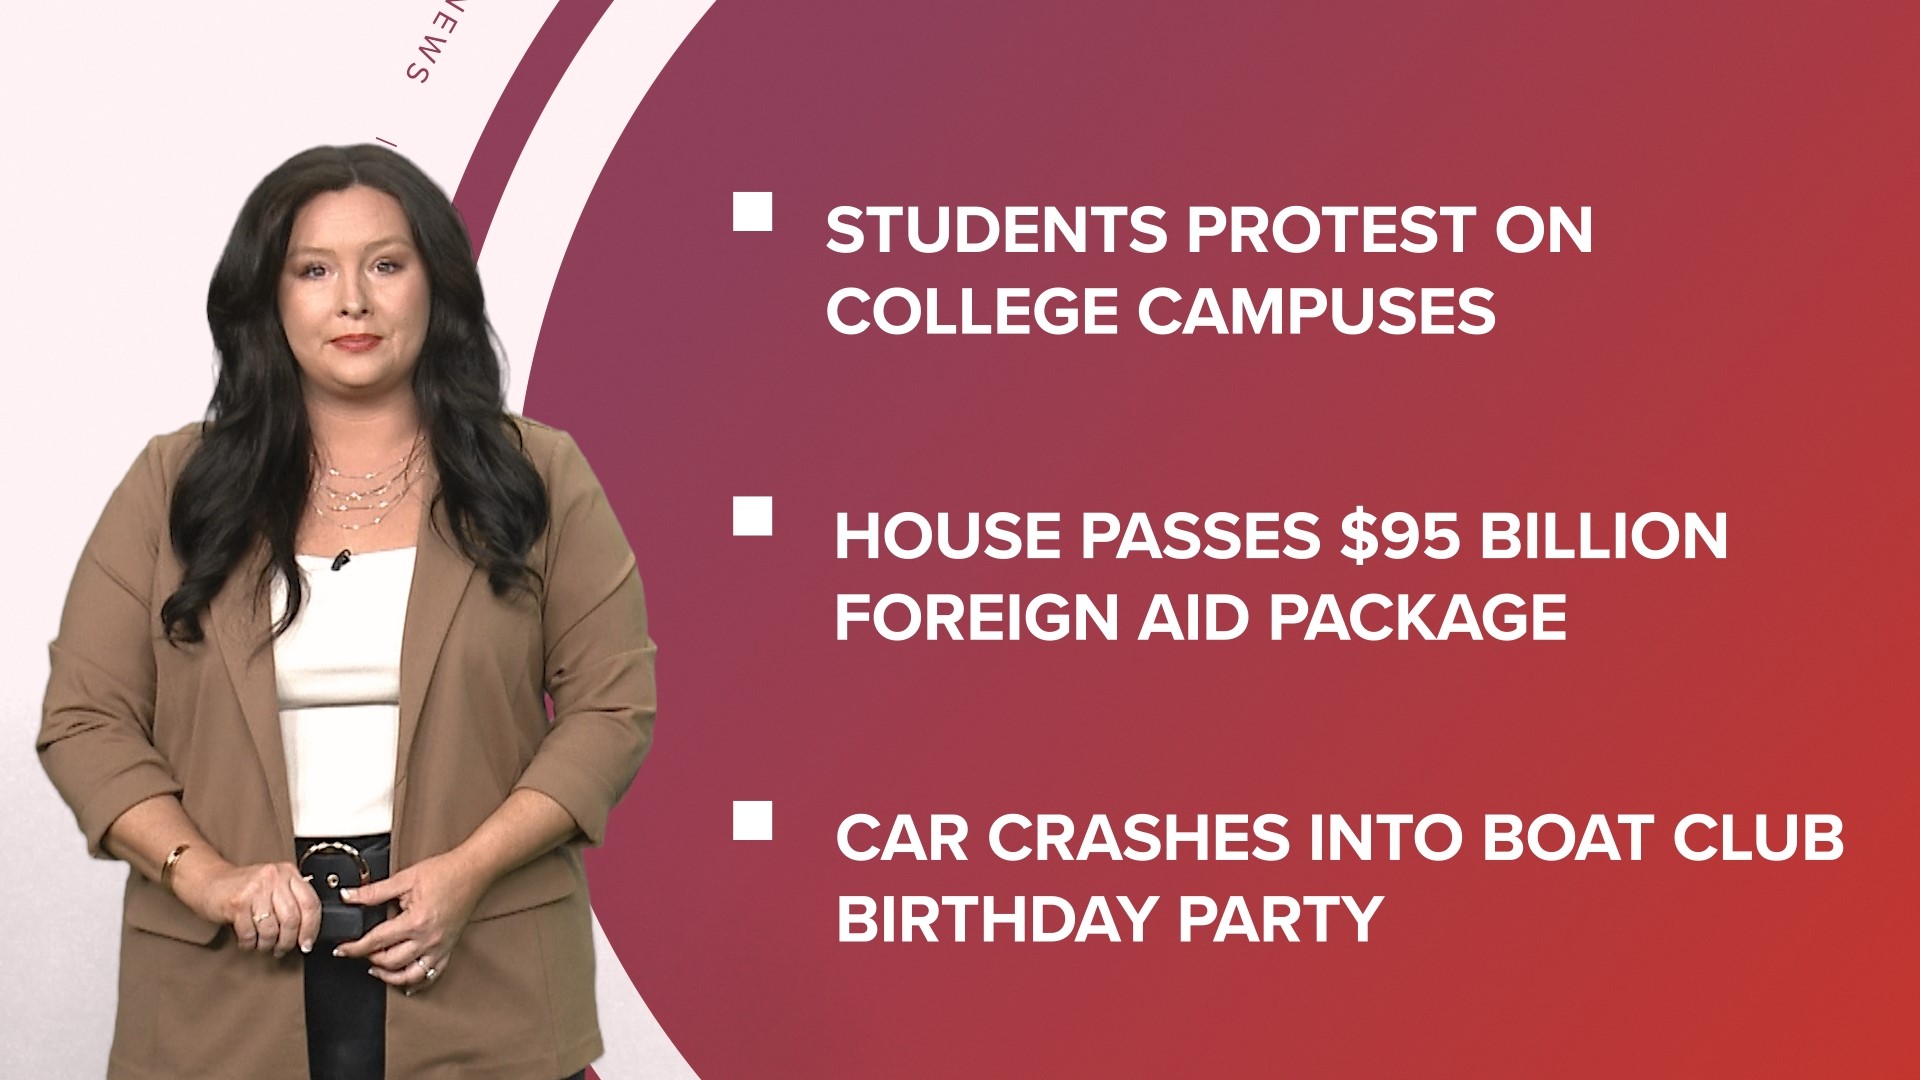 A look at what is happening in the news from students protesting on college campuses to the House passes $95B foreign aid package and Rock Hall inductees announced.